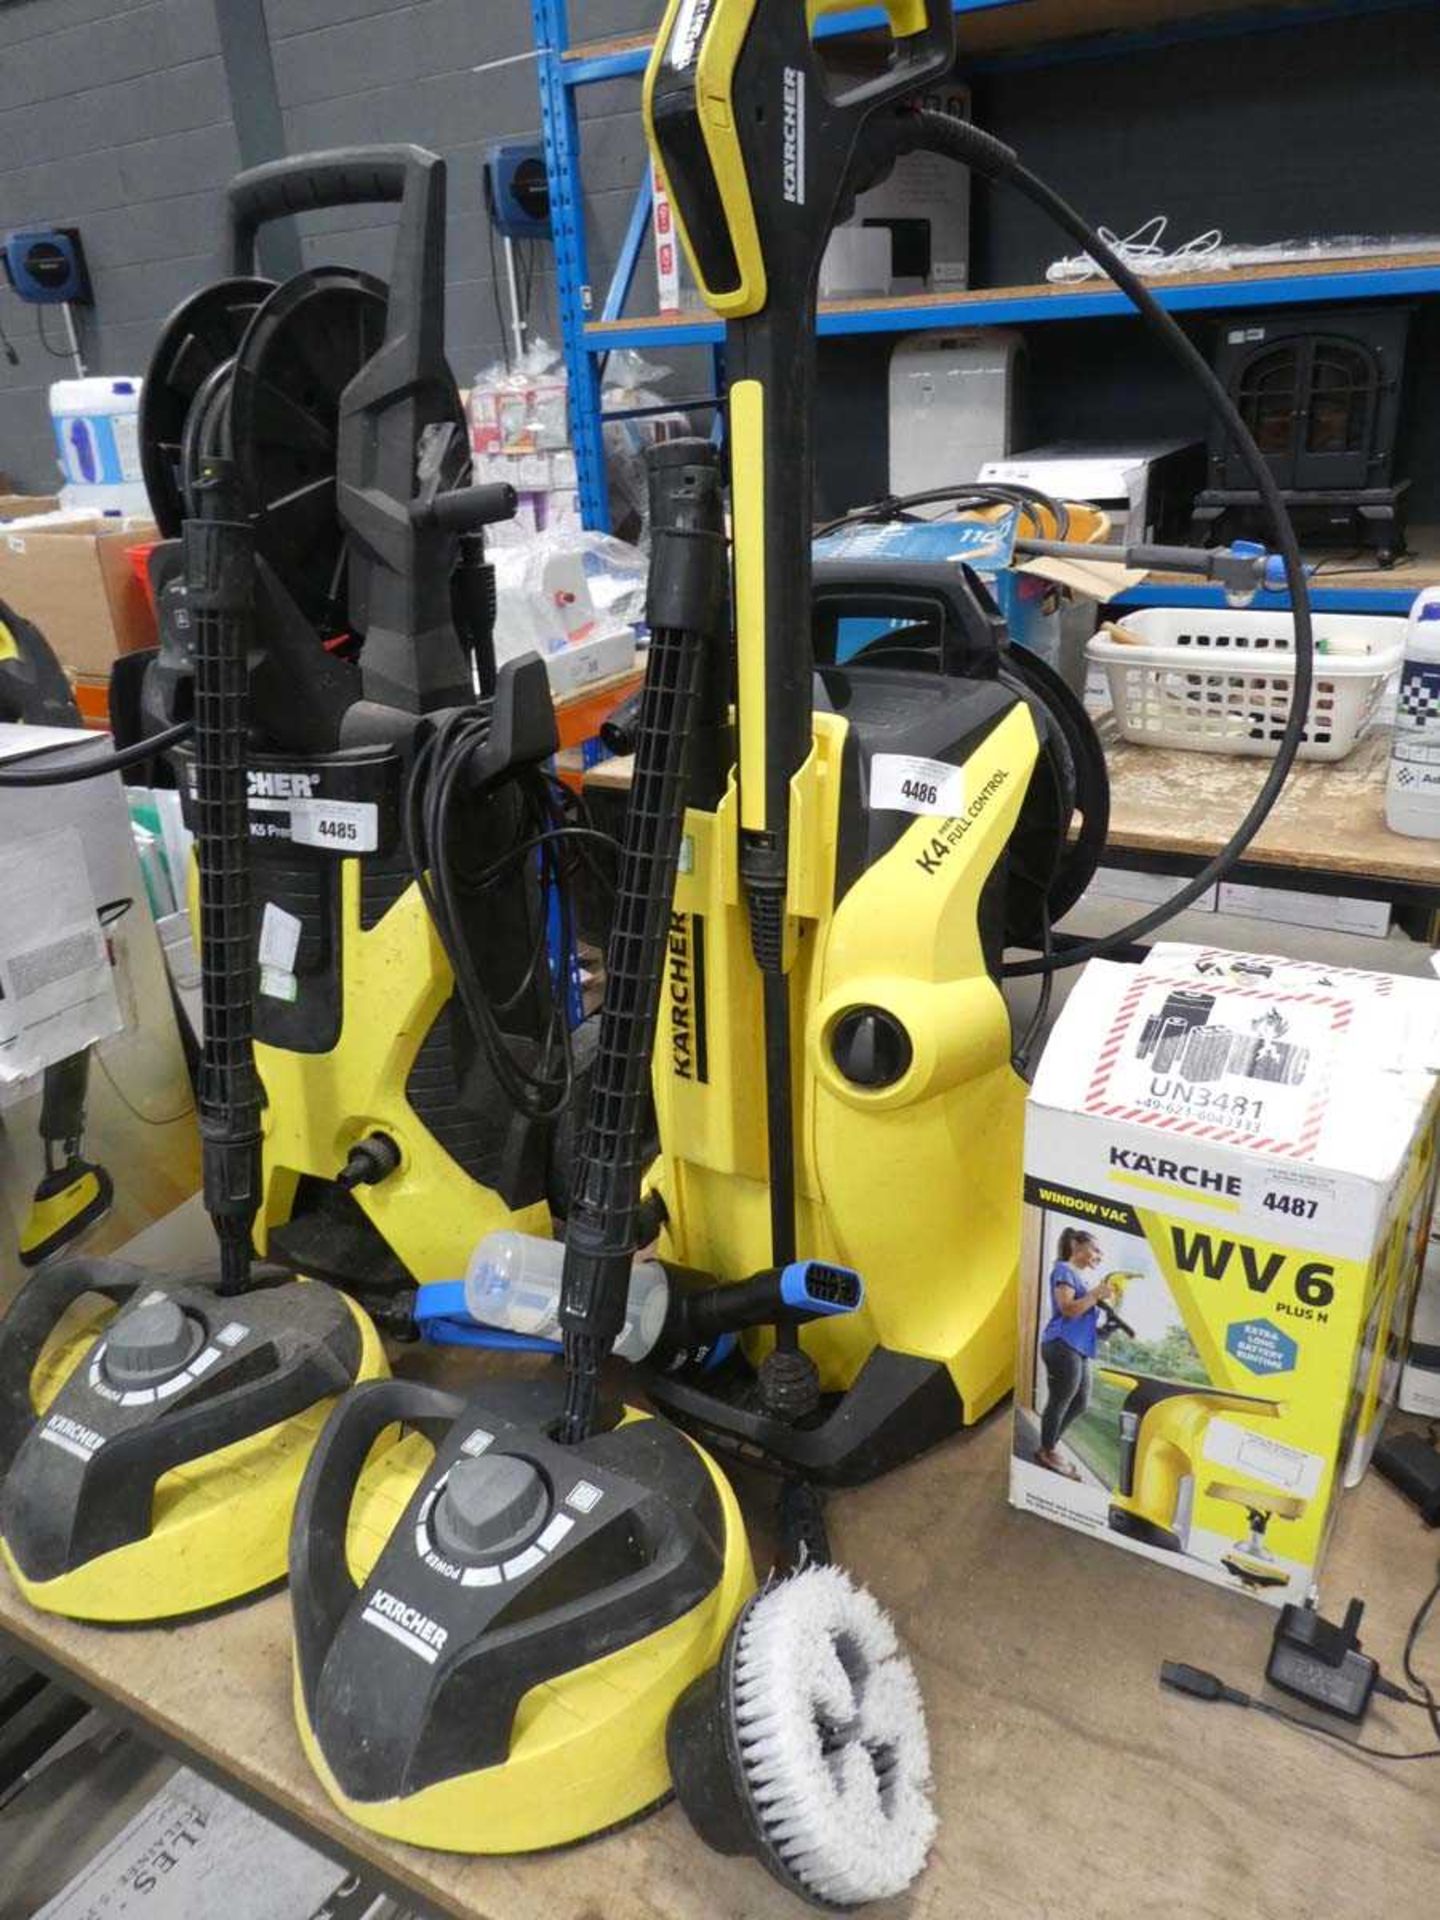 +VAT Karcher K4 premium full control electric pressure washer with patio cleaning head, wash brush